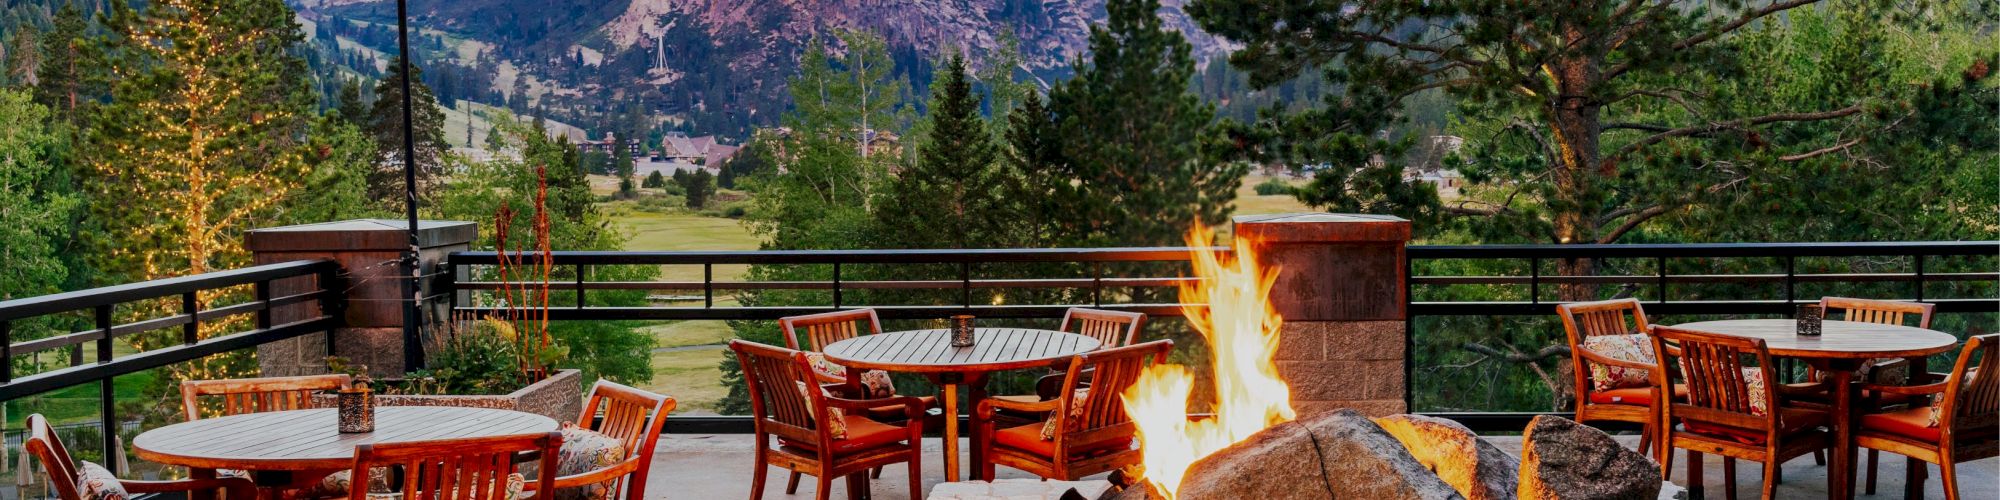 An outdoor patio with wooden tables and chairs, string lights, a stone fire pit, and a stunning mountain view in the background.